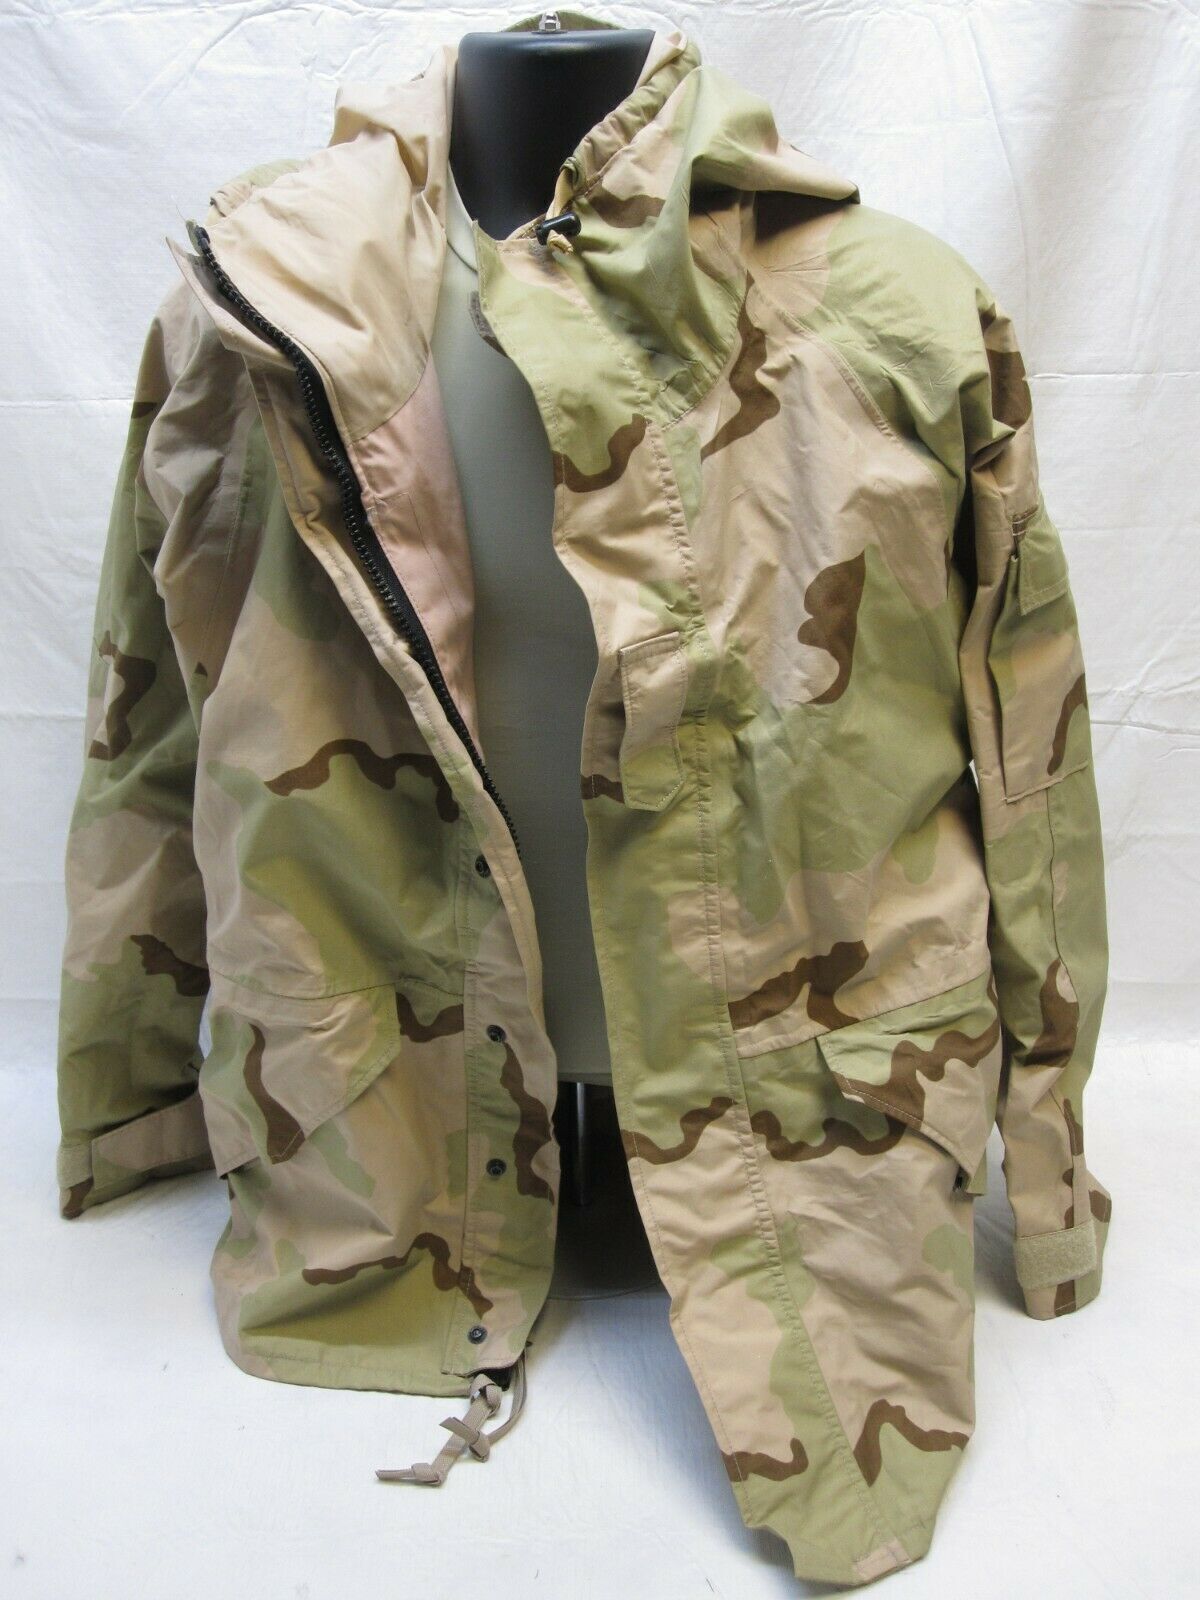 U.S MILITARY ISSUE DESERT GORE-TEX JACKET COLD/WET WEATHER PARKA X-LARGE/REGULAR